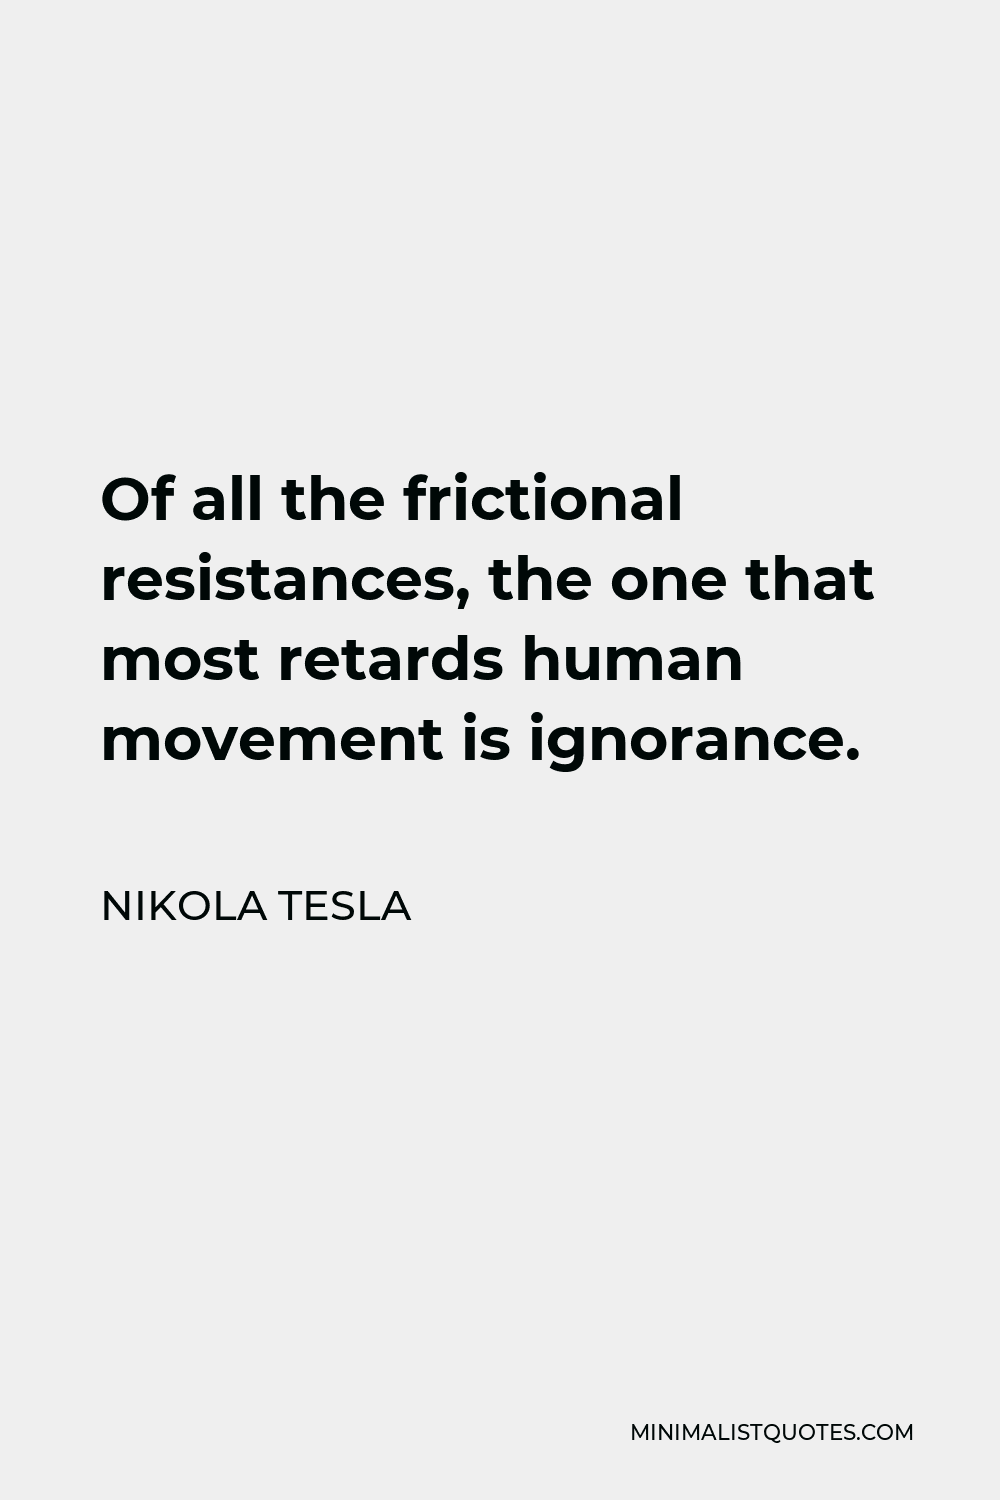 Nikola Tesla Quote - Of all the frictional resistances, the one that most retards human movement is ignorance.